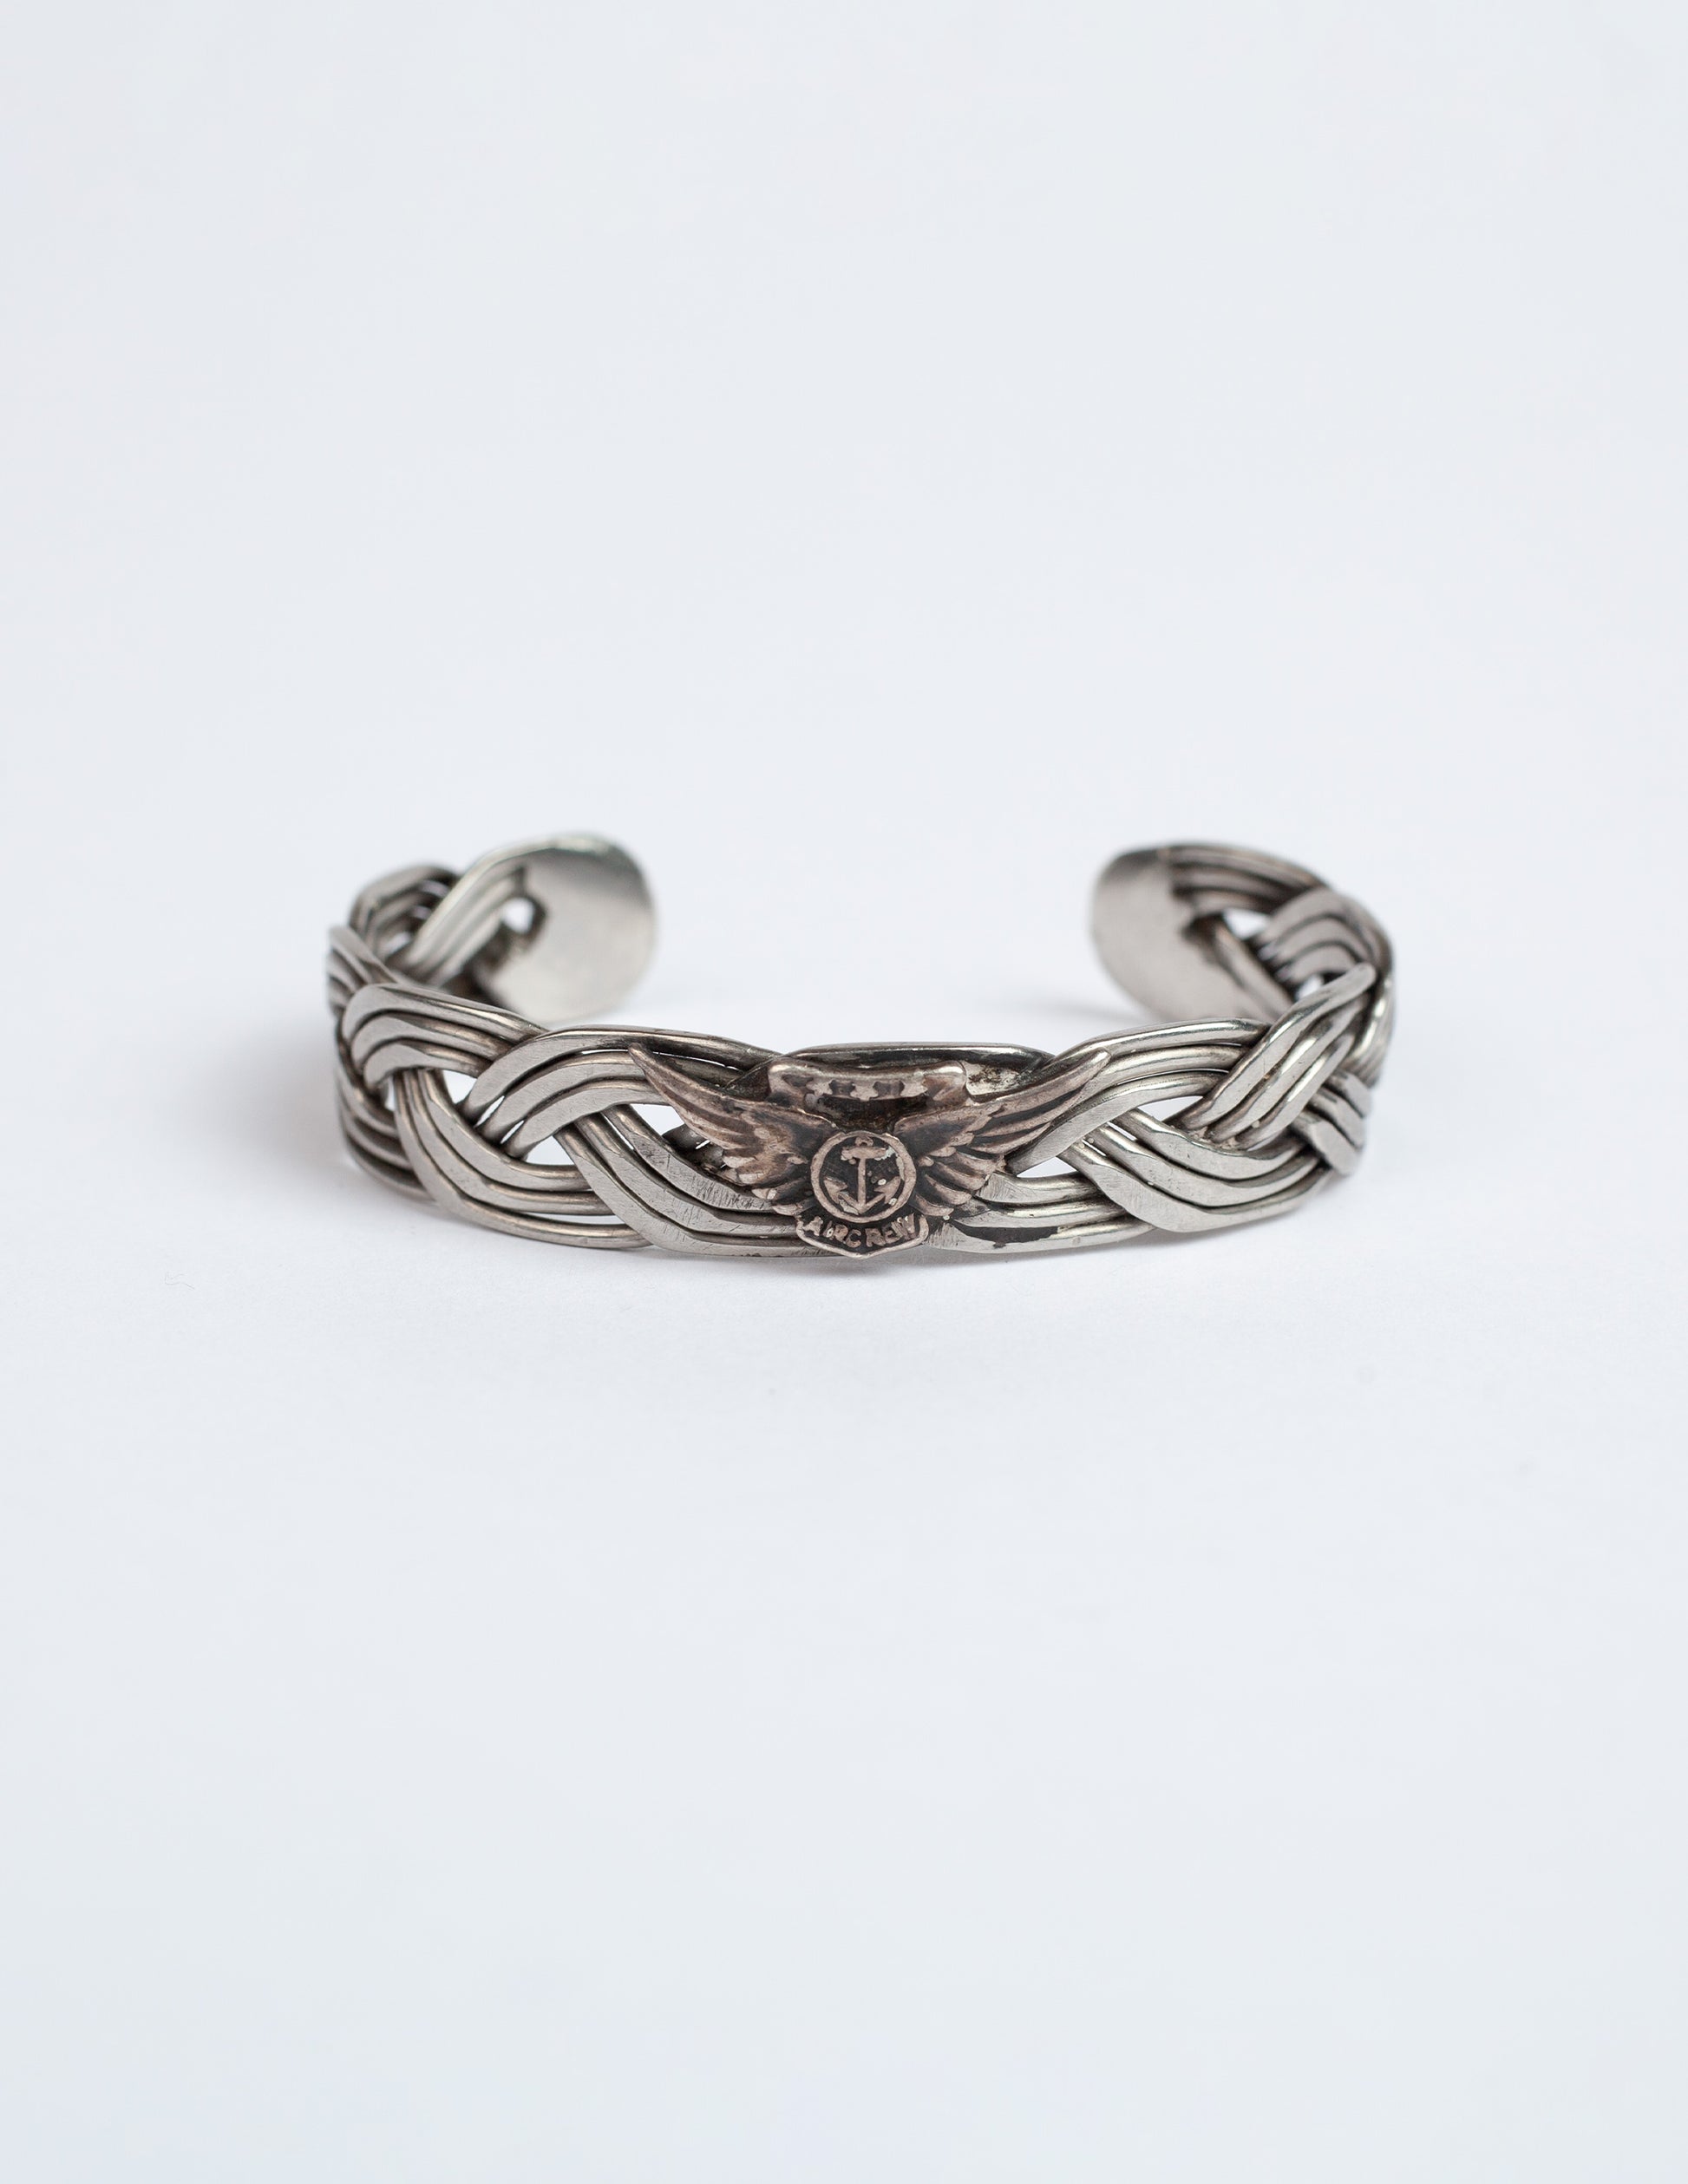 1940s US Navy Aircrew Sterling Silver Cuff